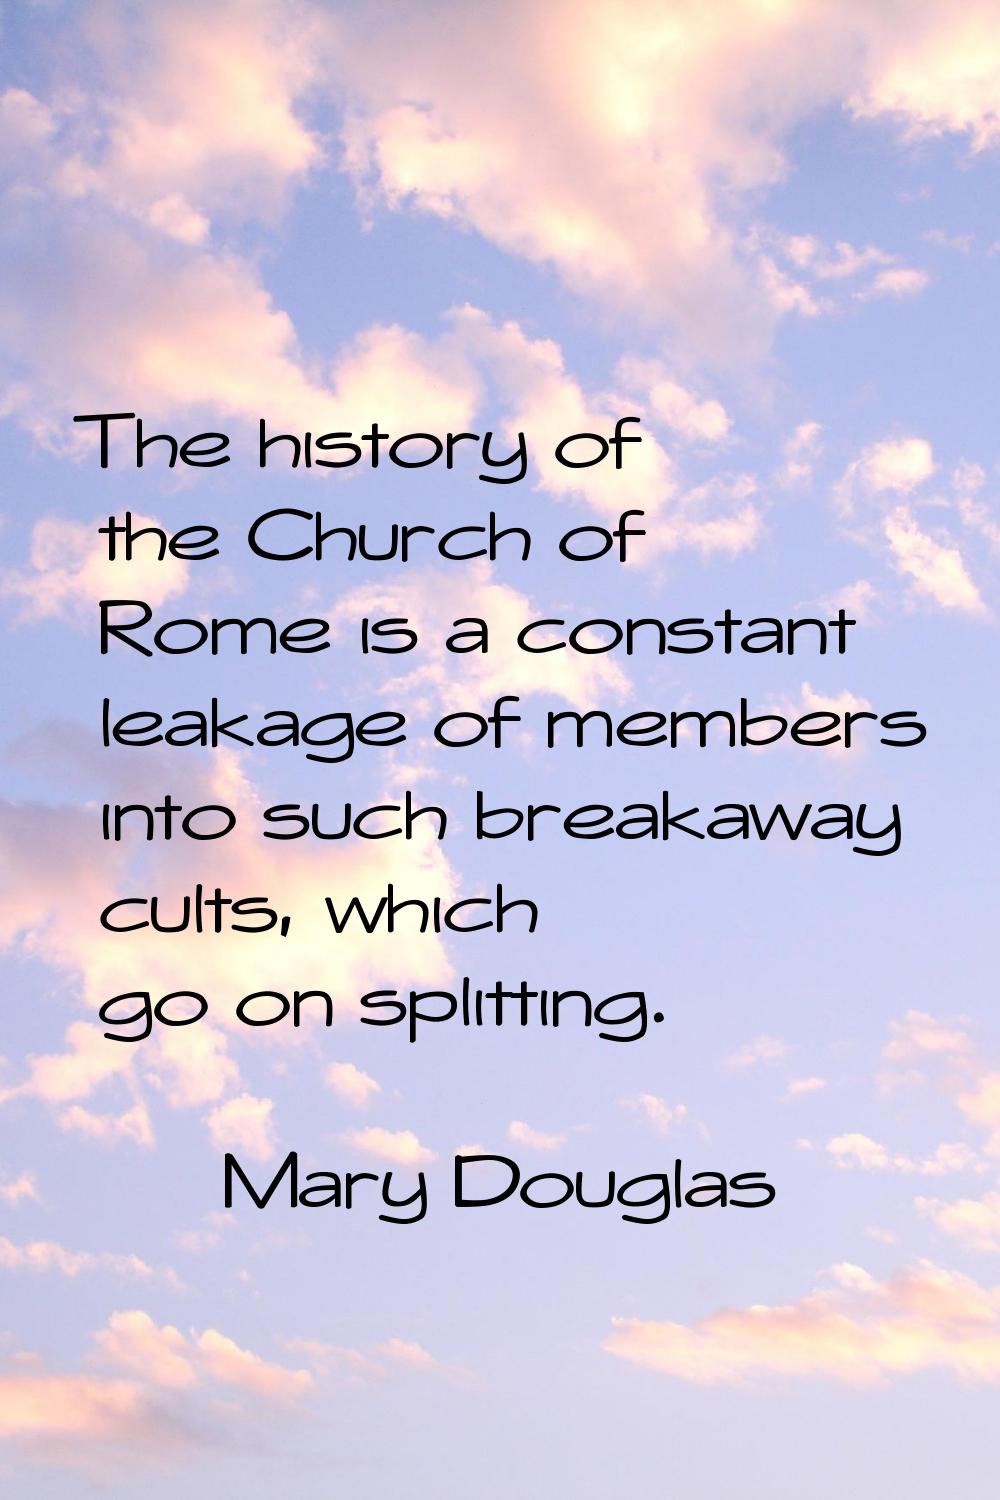 The history of the Church of Rome is a constant leakage of members into such breakaway cults, which